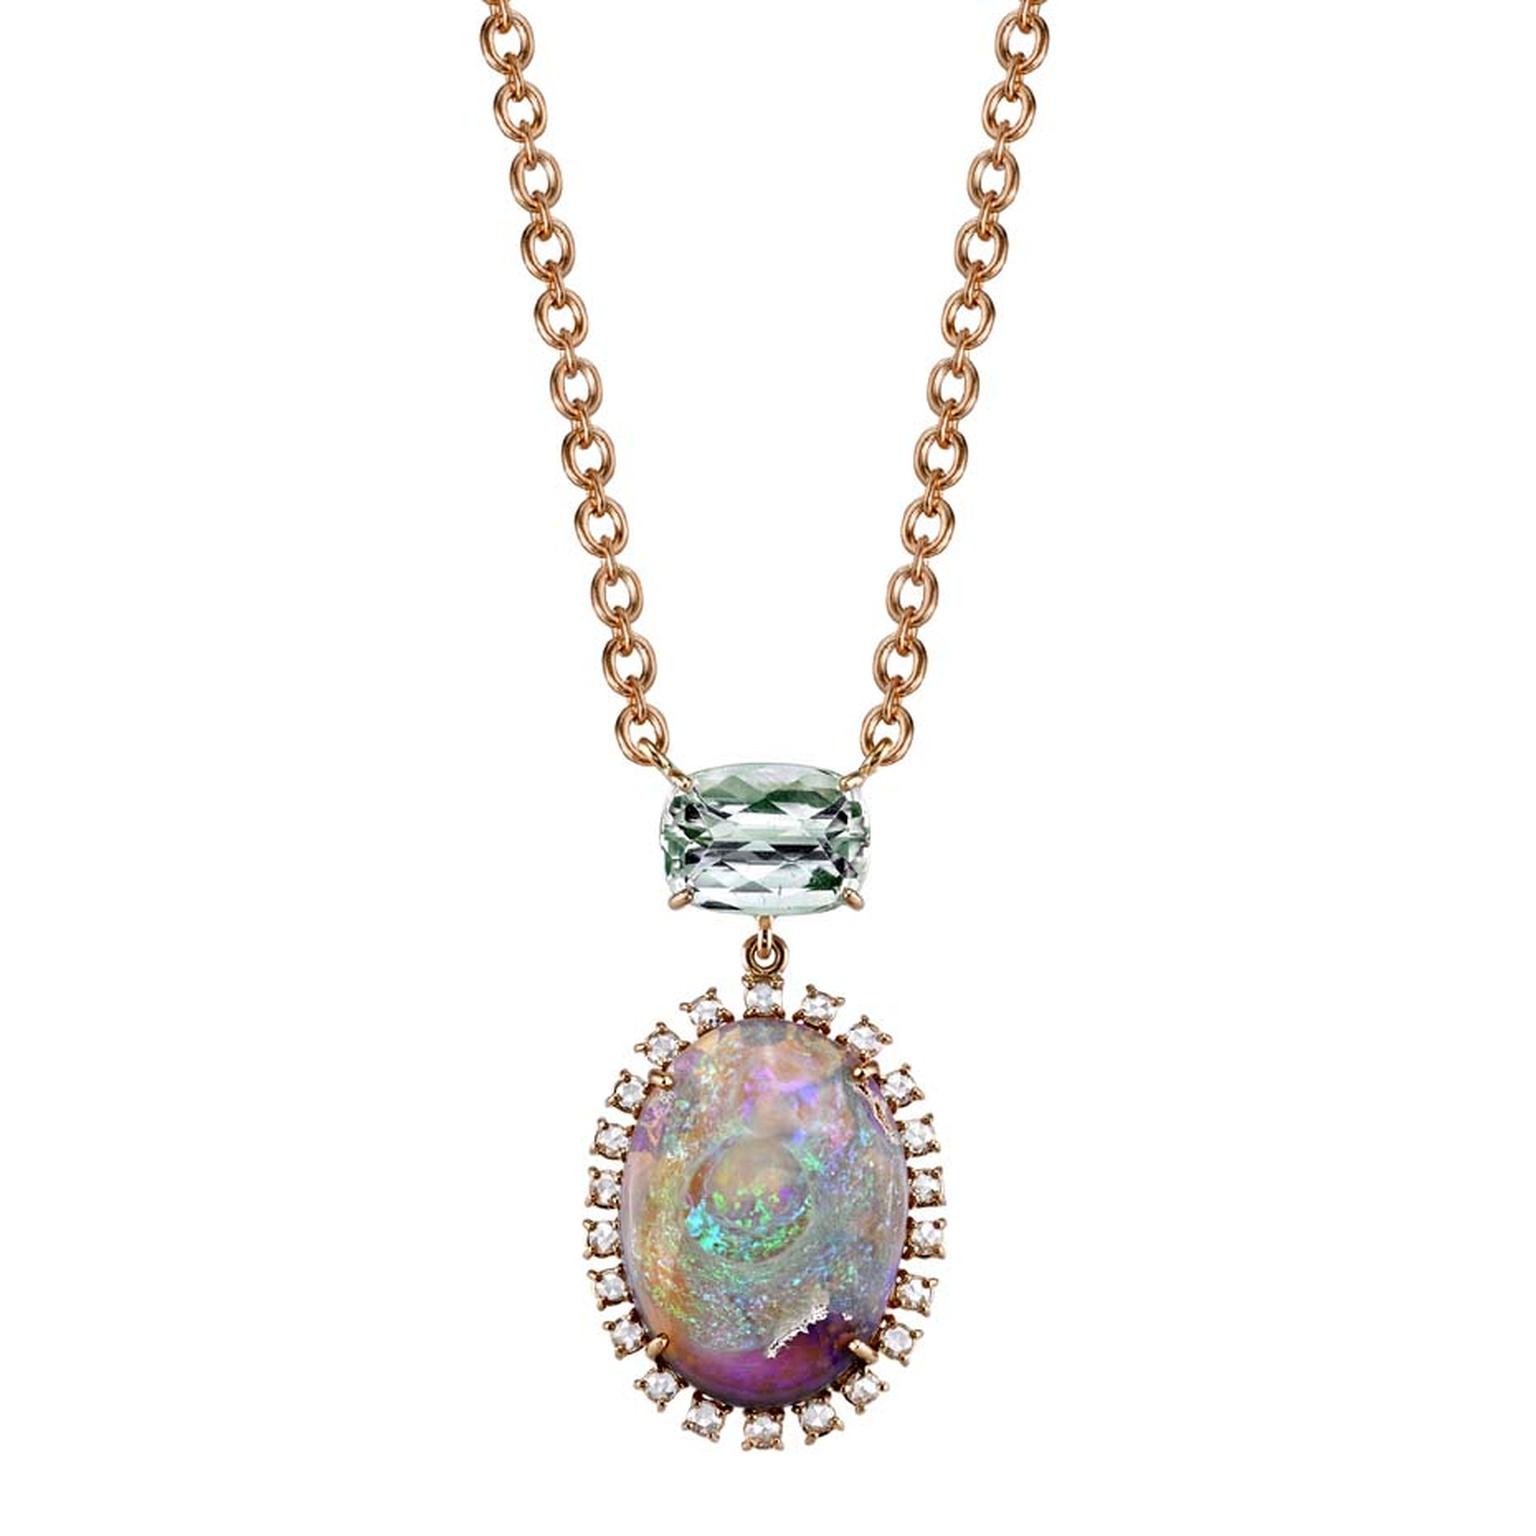 Irene Neuwirth rose gold one-of-a-kind necklace with green tourmaline, Lightning Ridge opal and diamonds ($9,770).